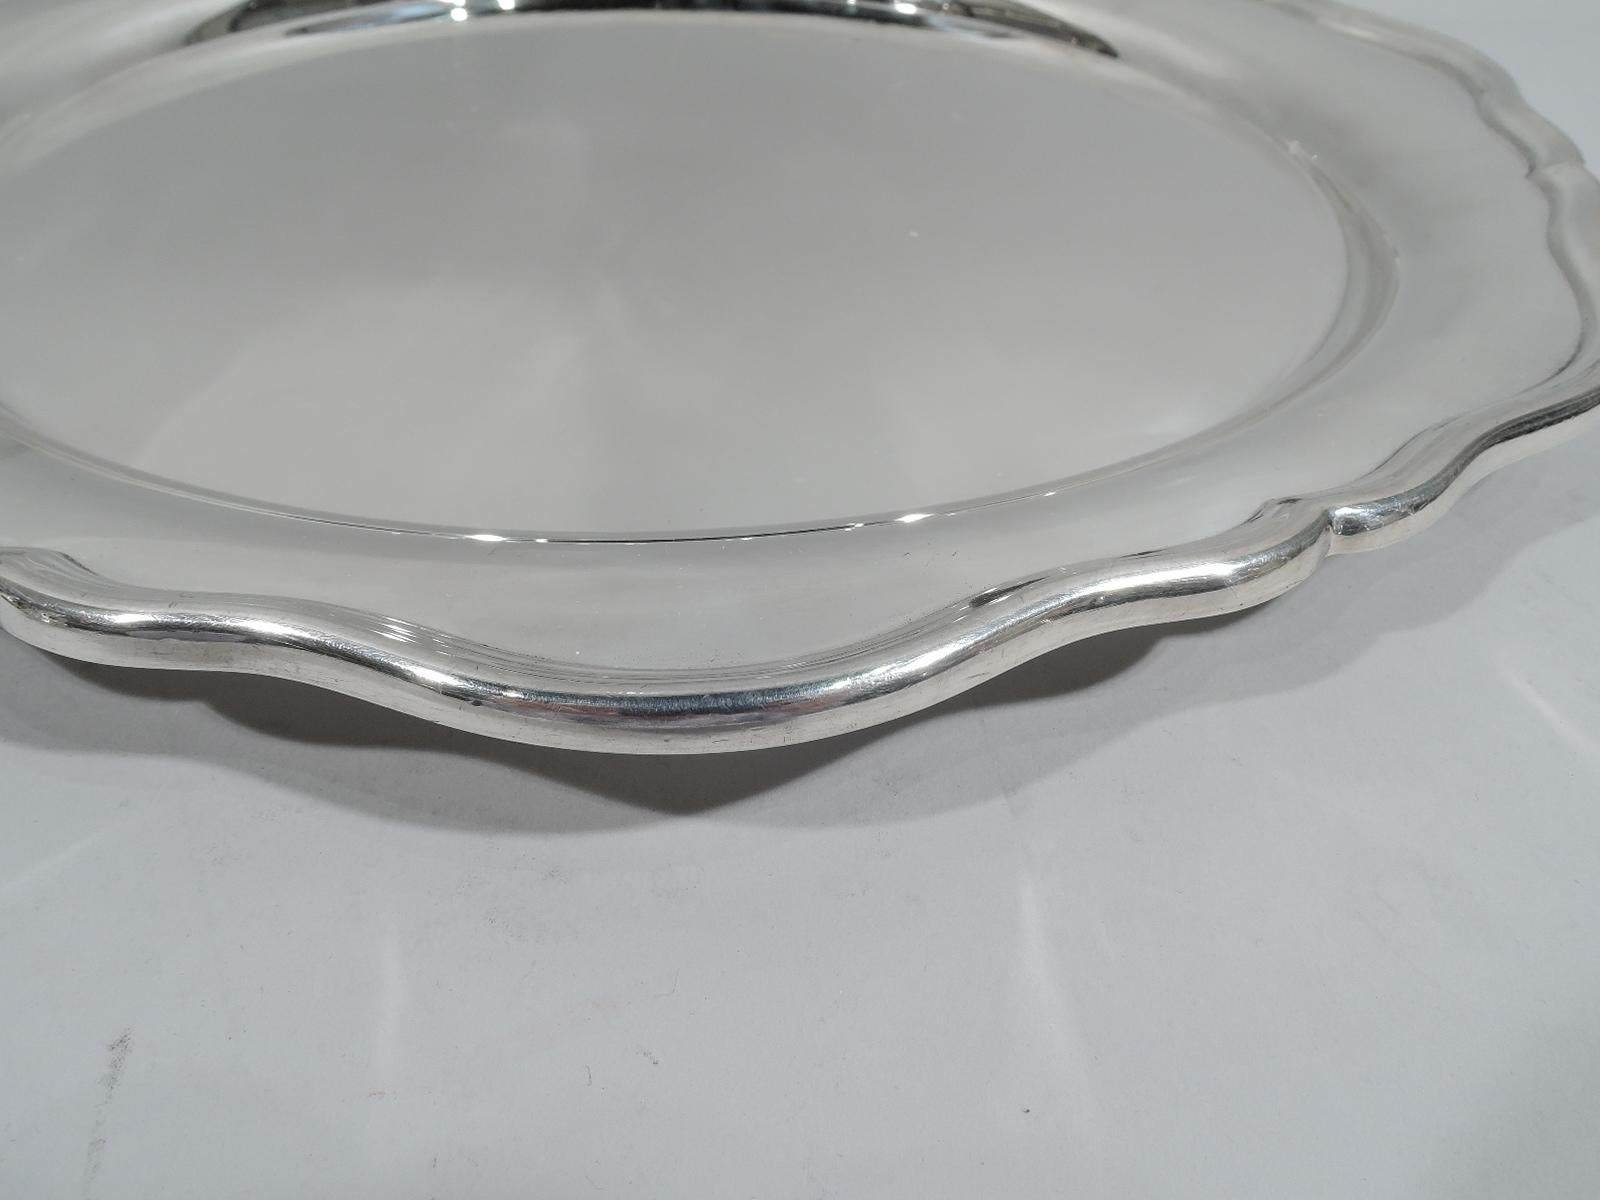 Elizabeth II sterling silver serving tray. Made by Edward Viner in Sheffield in 1960. Round with well and molded and gently scrolled rim. Pretty and old fashioned. Fully marked. Weight: 33 troy ounces.